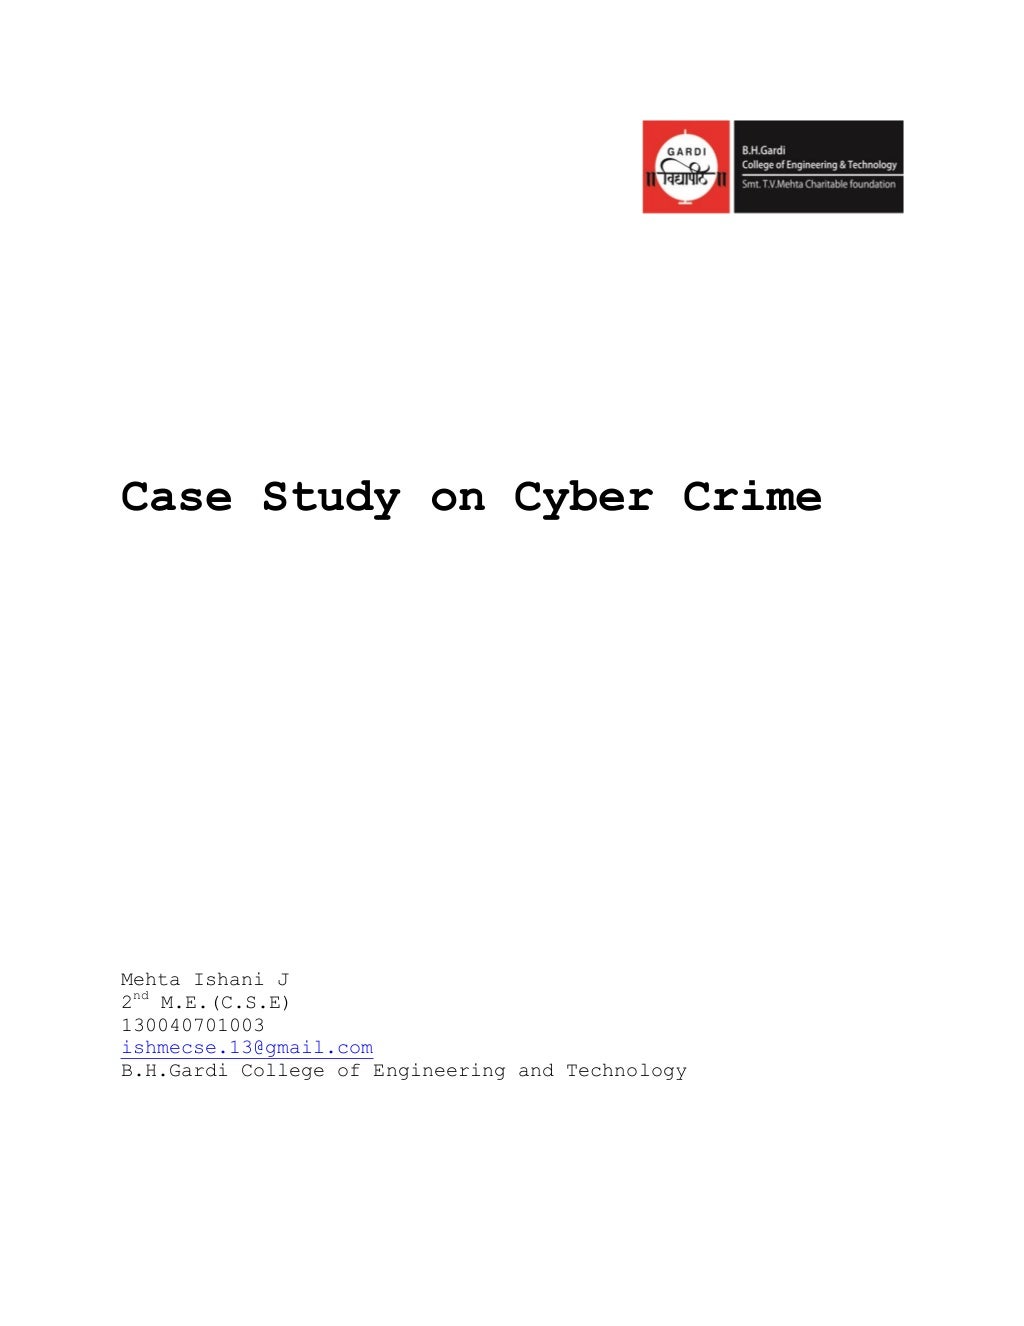 recent case study on cyber crime